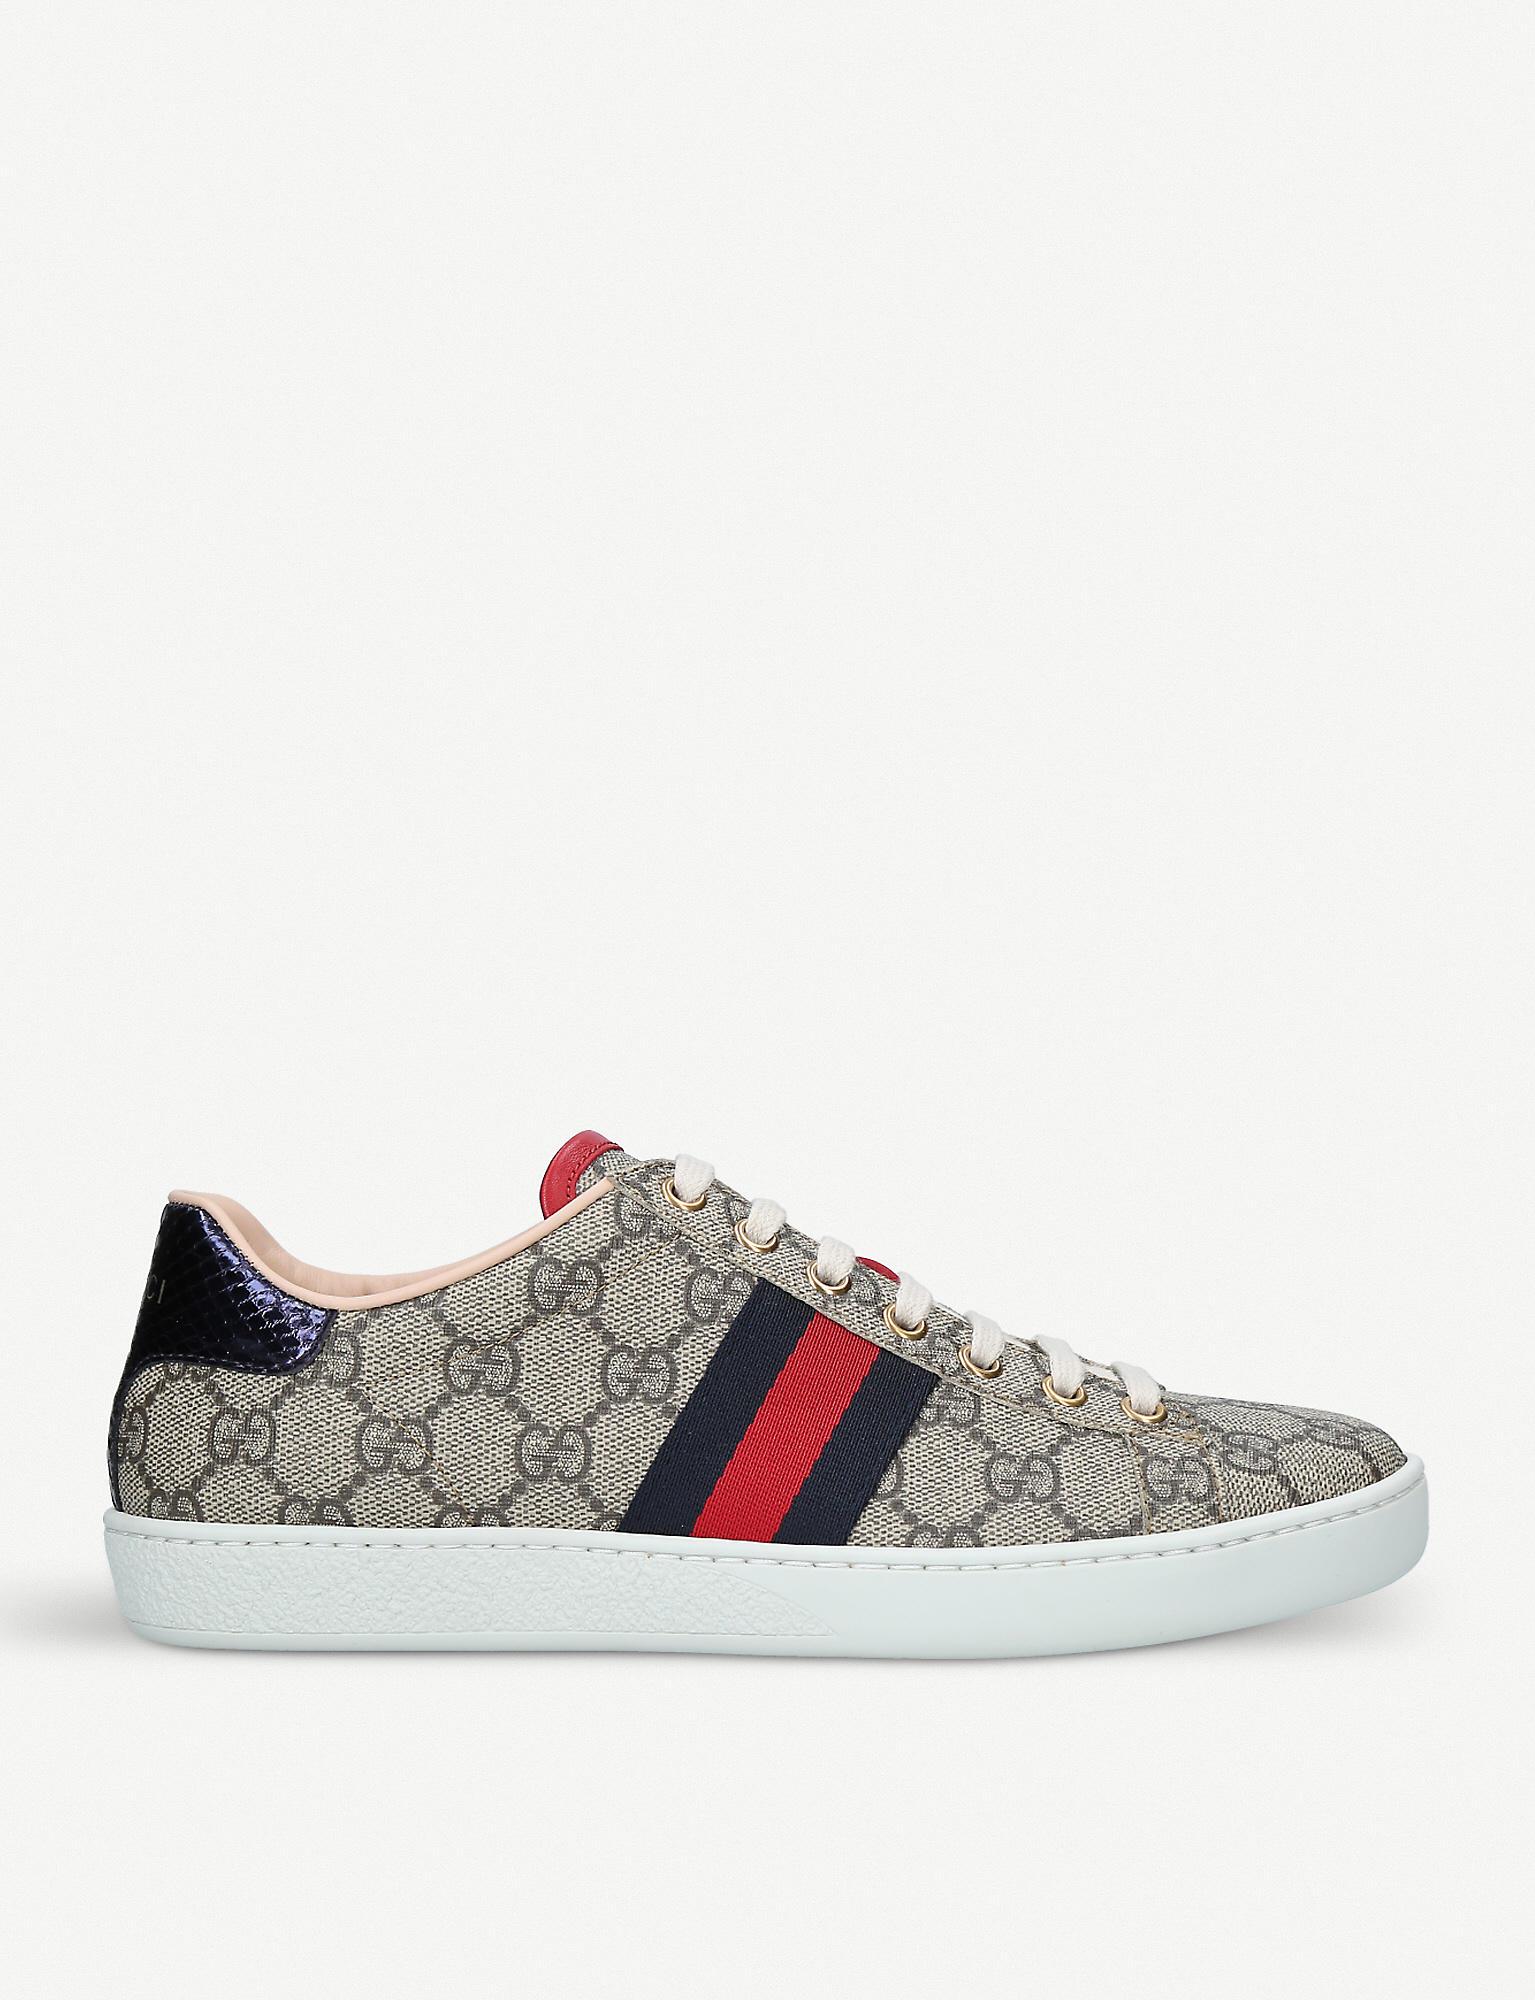 Gucci Canvas Ace GG Supreme Sneakers - Save 28% - Lyst